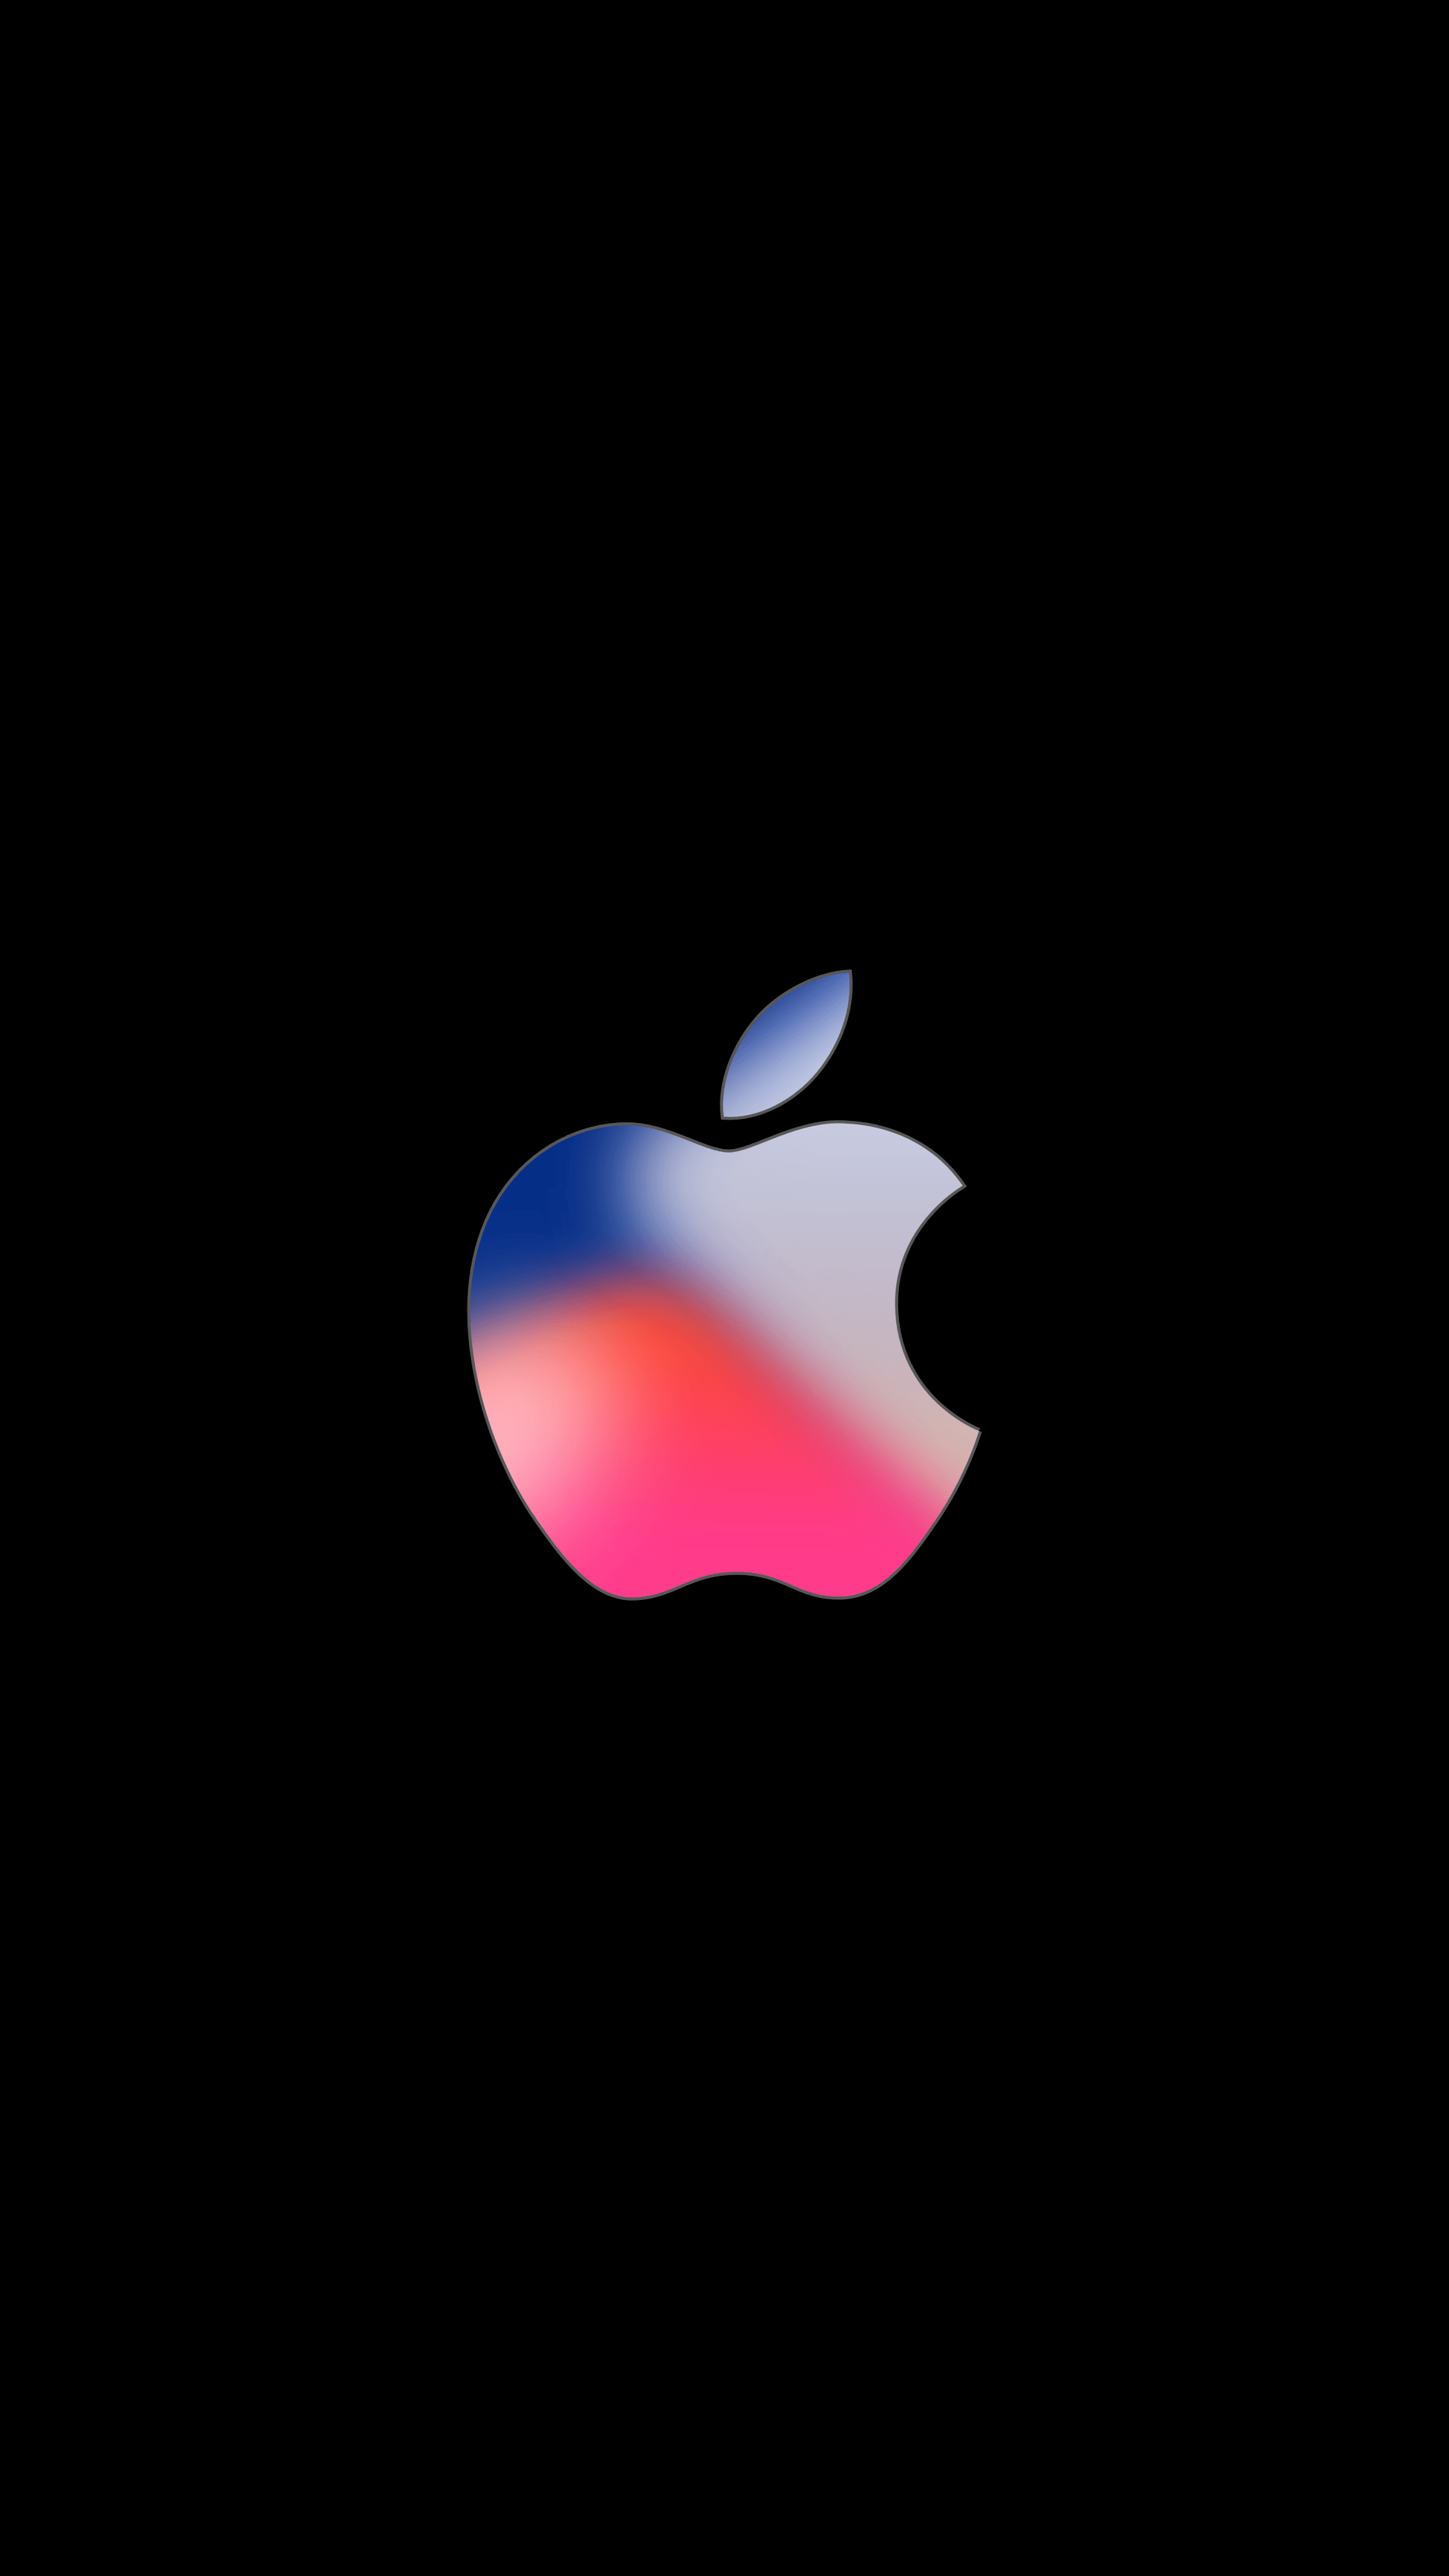 Apple iPhone XR Wallpaper Free Apple iPhone XR Background